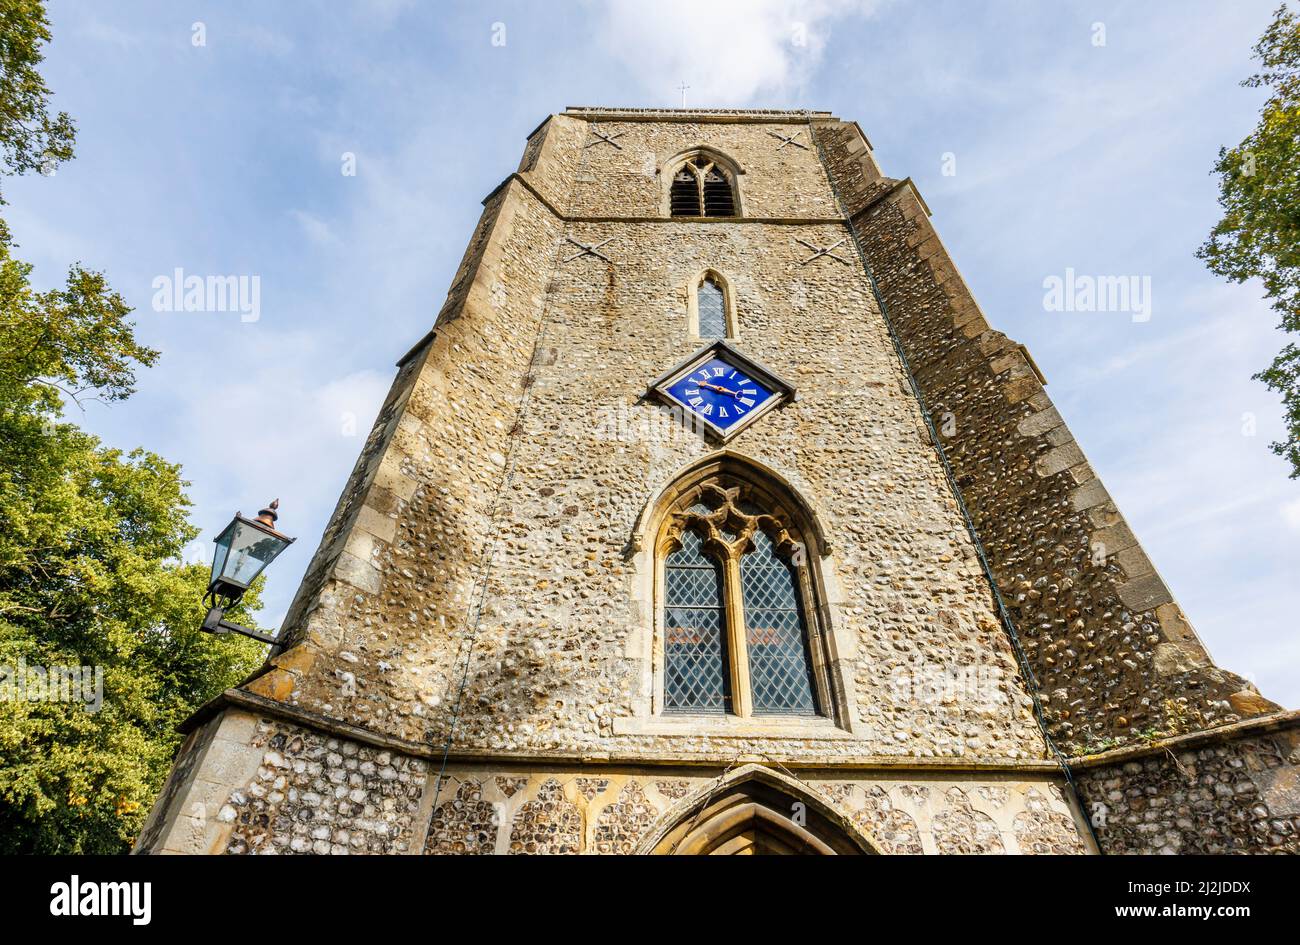 The flint and stone tower of the parish Church of St Andrew the Apostle in Holt, a small historic Georgian market town in north Norfolk, England Stock Photo